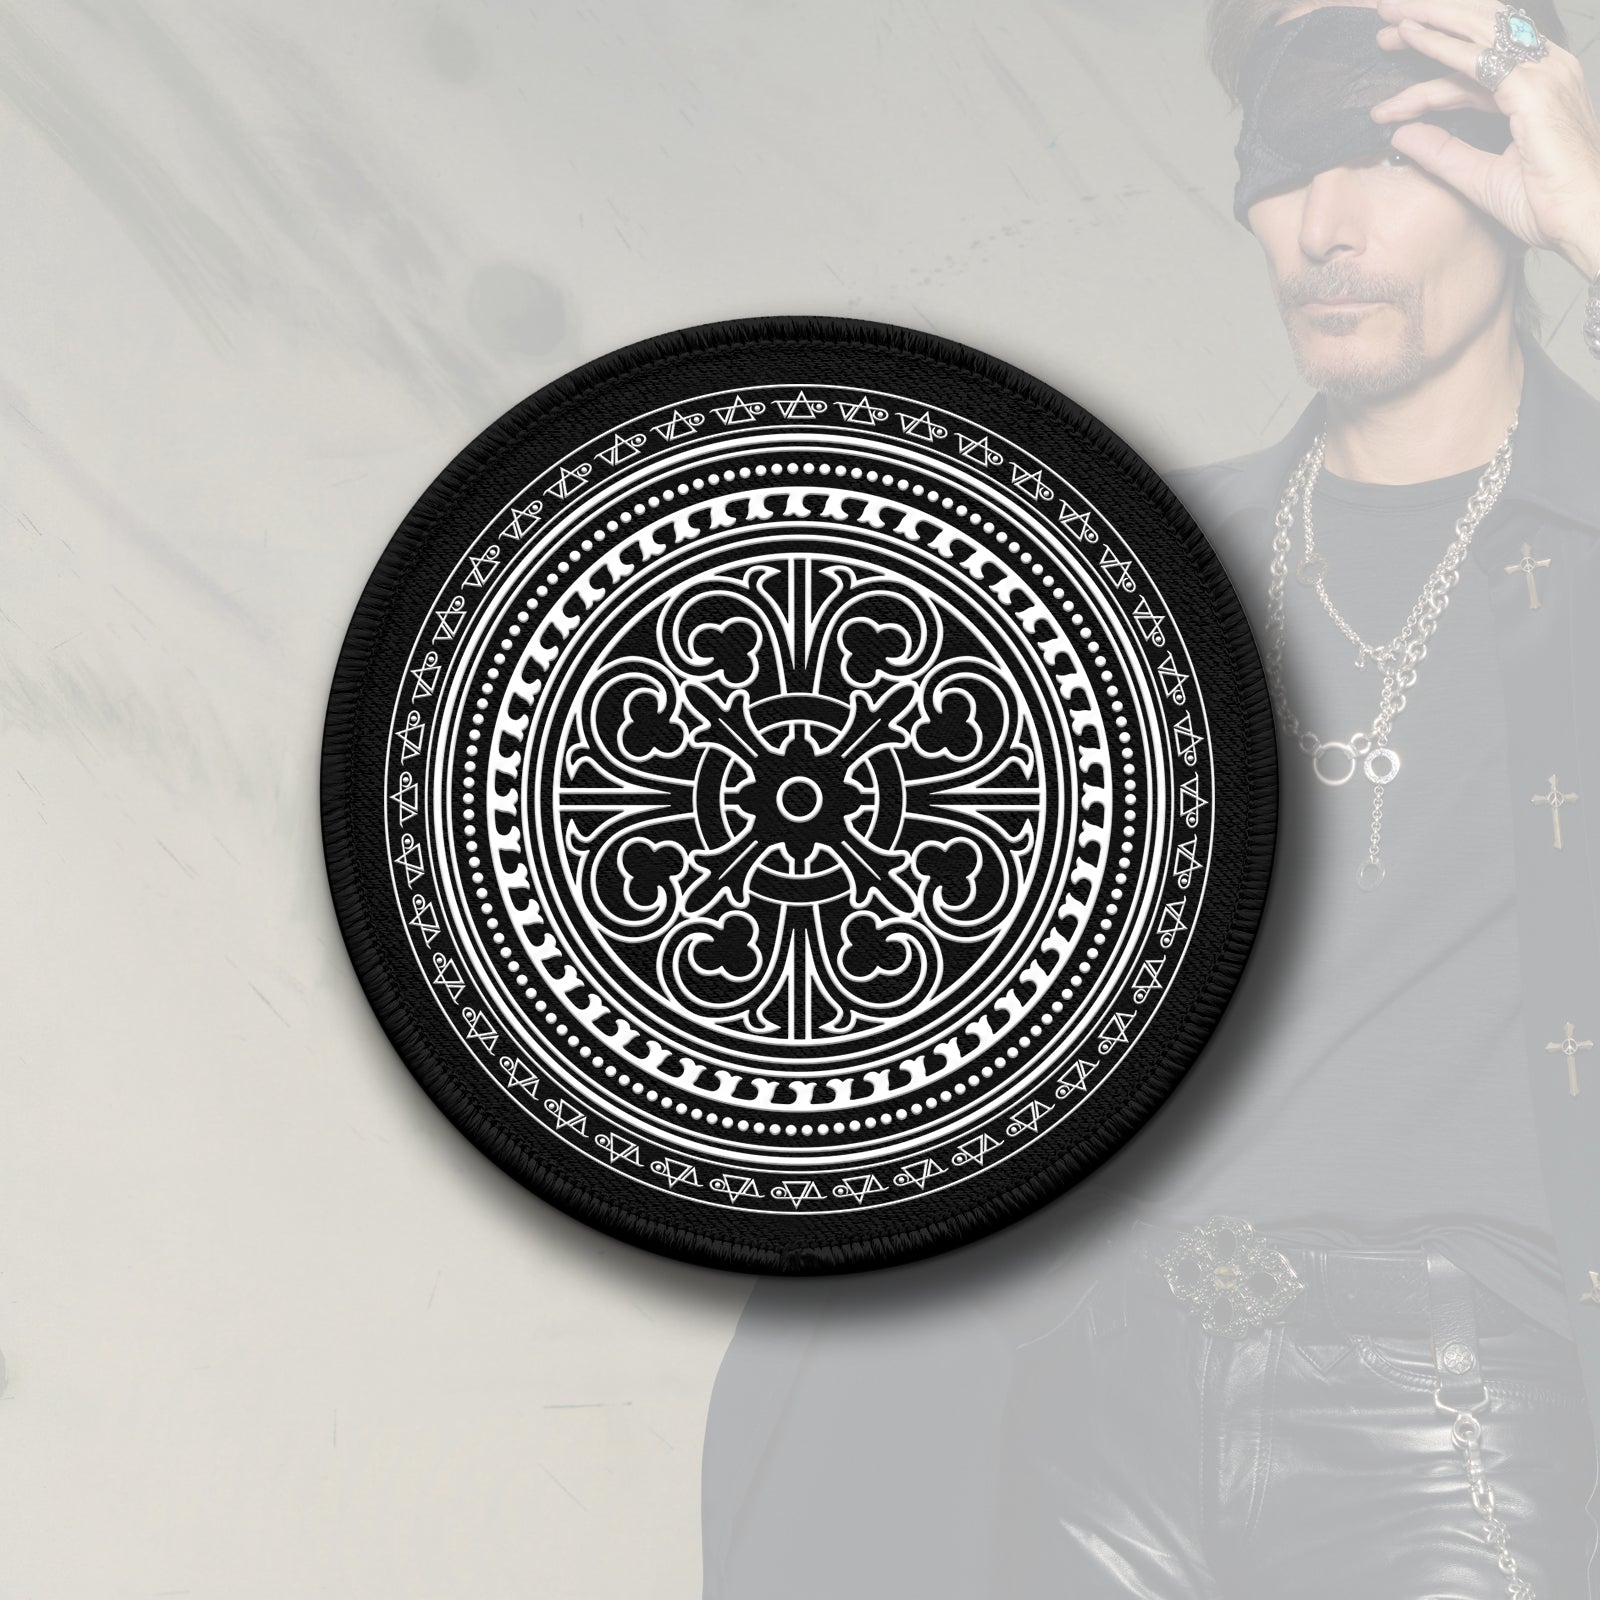  Image of a black and white circular patch against a faded white transparent background with an image of steve vai in the corner lifting a bandana up that is over his eye. the patch is black and has white print on it. it is an abstract circular image that has a pattern made up of various shapes and symbols that makes it look like it moves when you look at it.